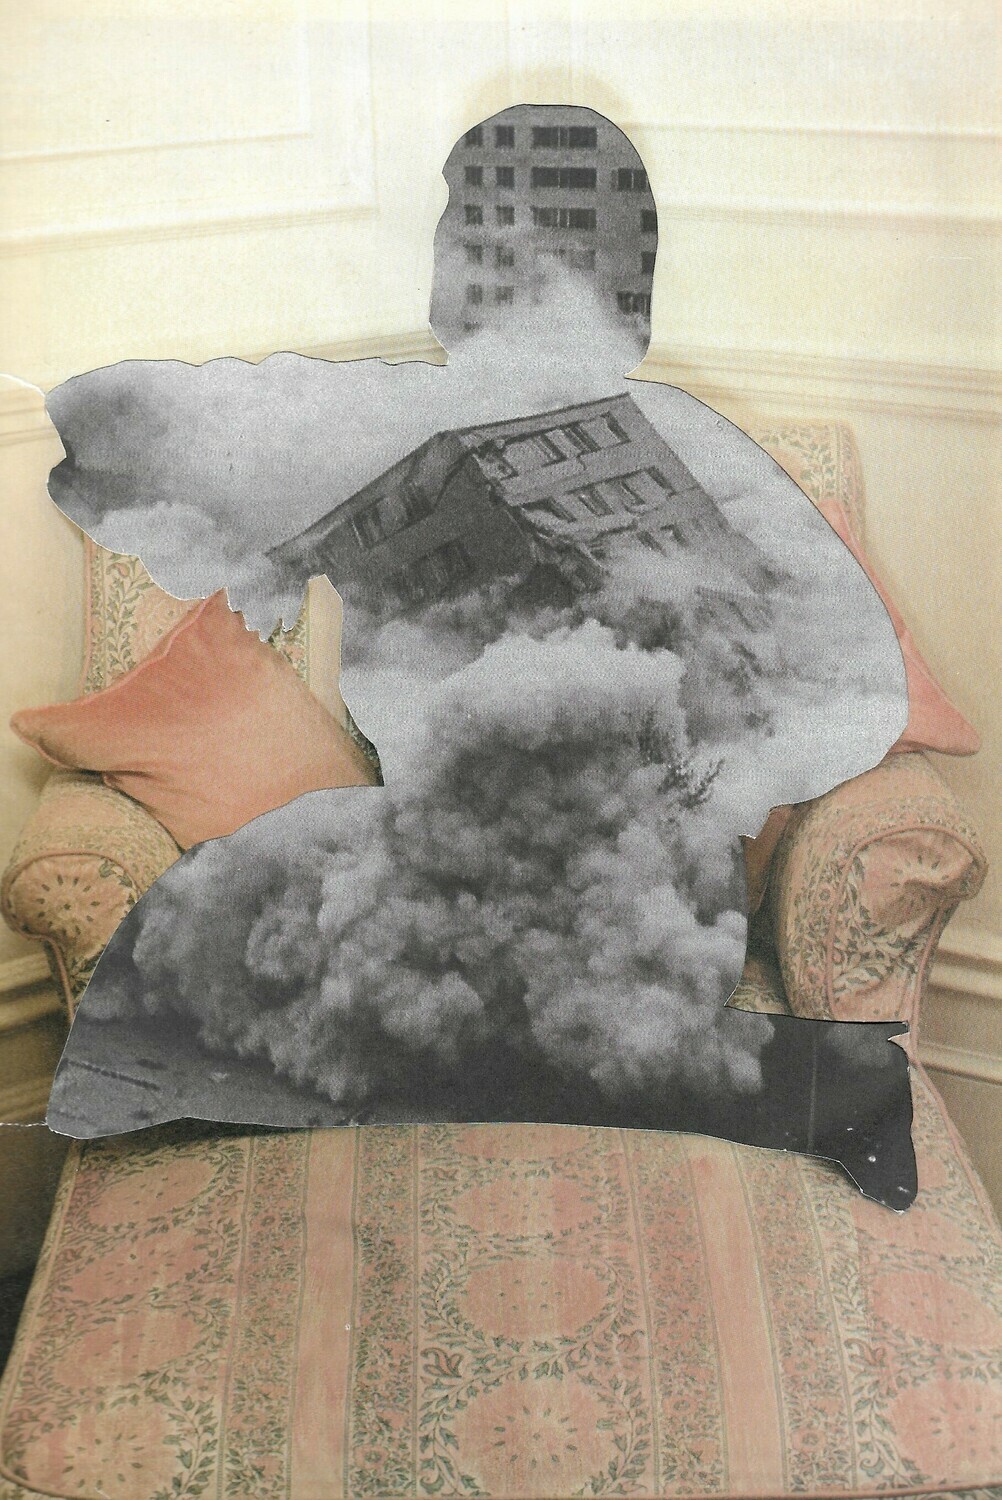 Collage - implode / forbode